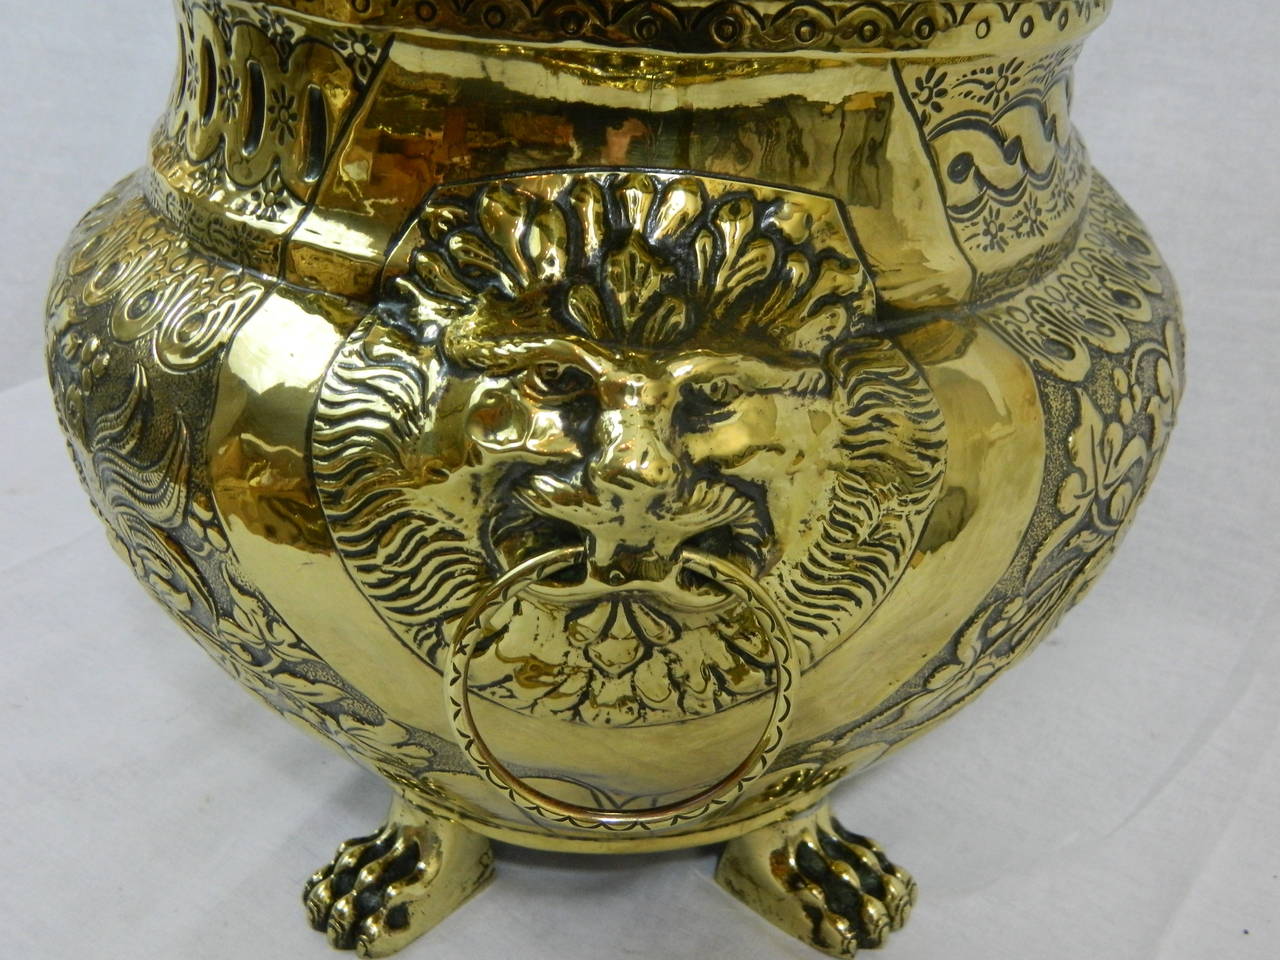 19th Century Polished Brass Large Jardiniere or Planter with Original Liner For Sale 2